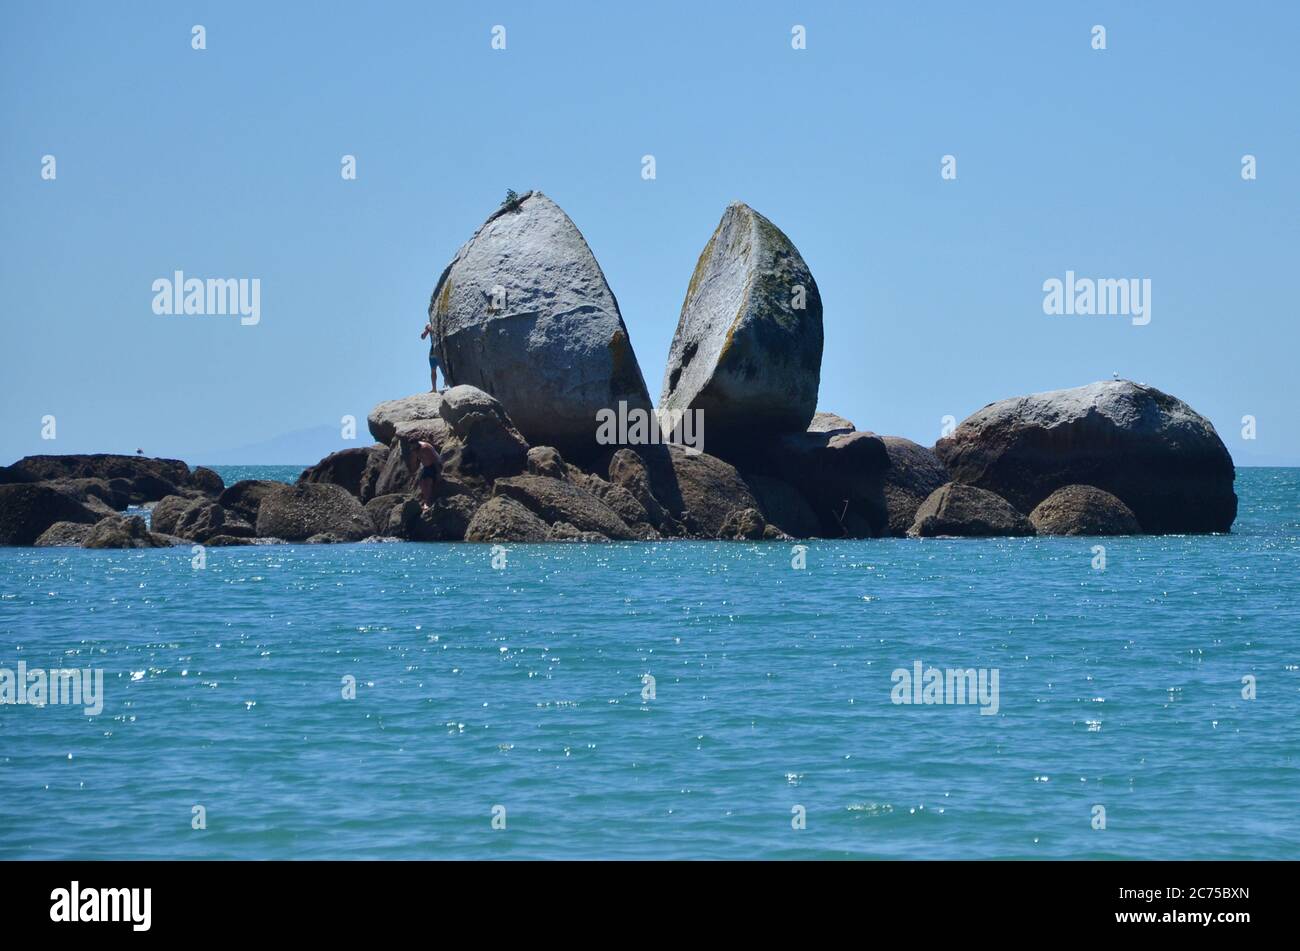 Split Apple Rock is a geological rock formation in Tasman Bay off the northern coast of the South Island of New Zealand. Stock Photo